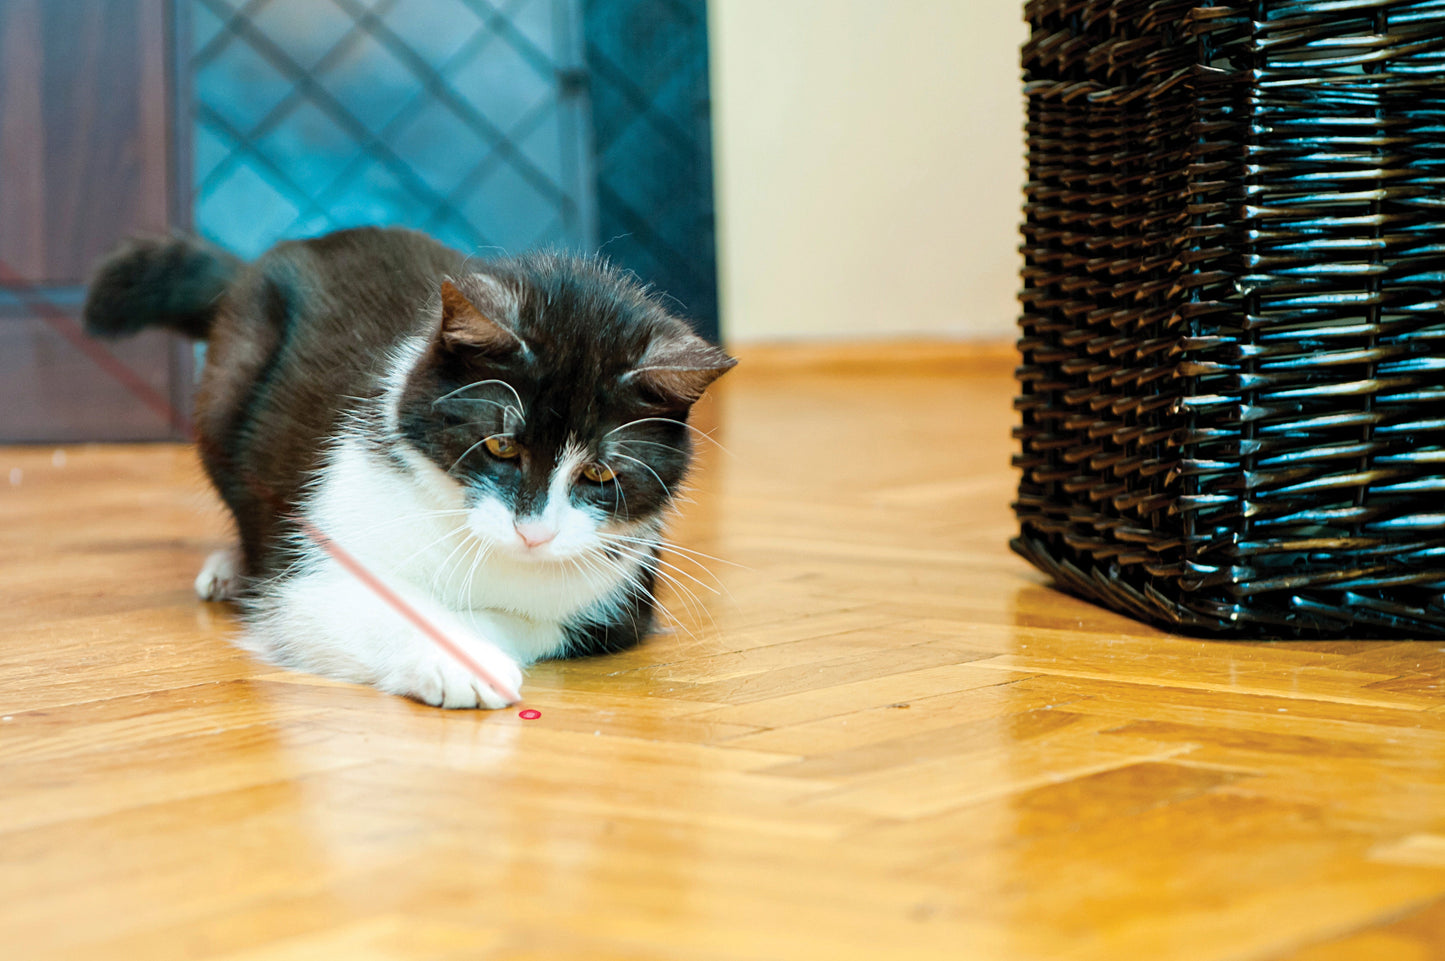 cat laser pointer toy being played with